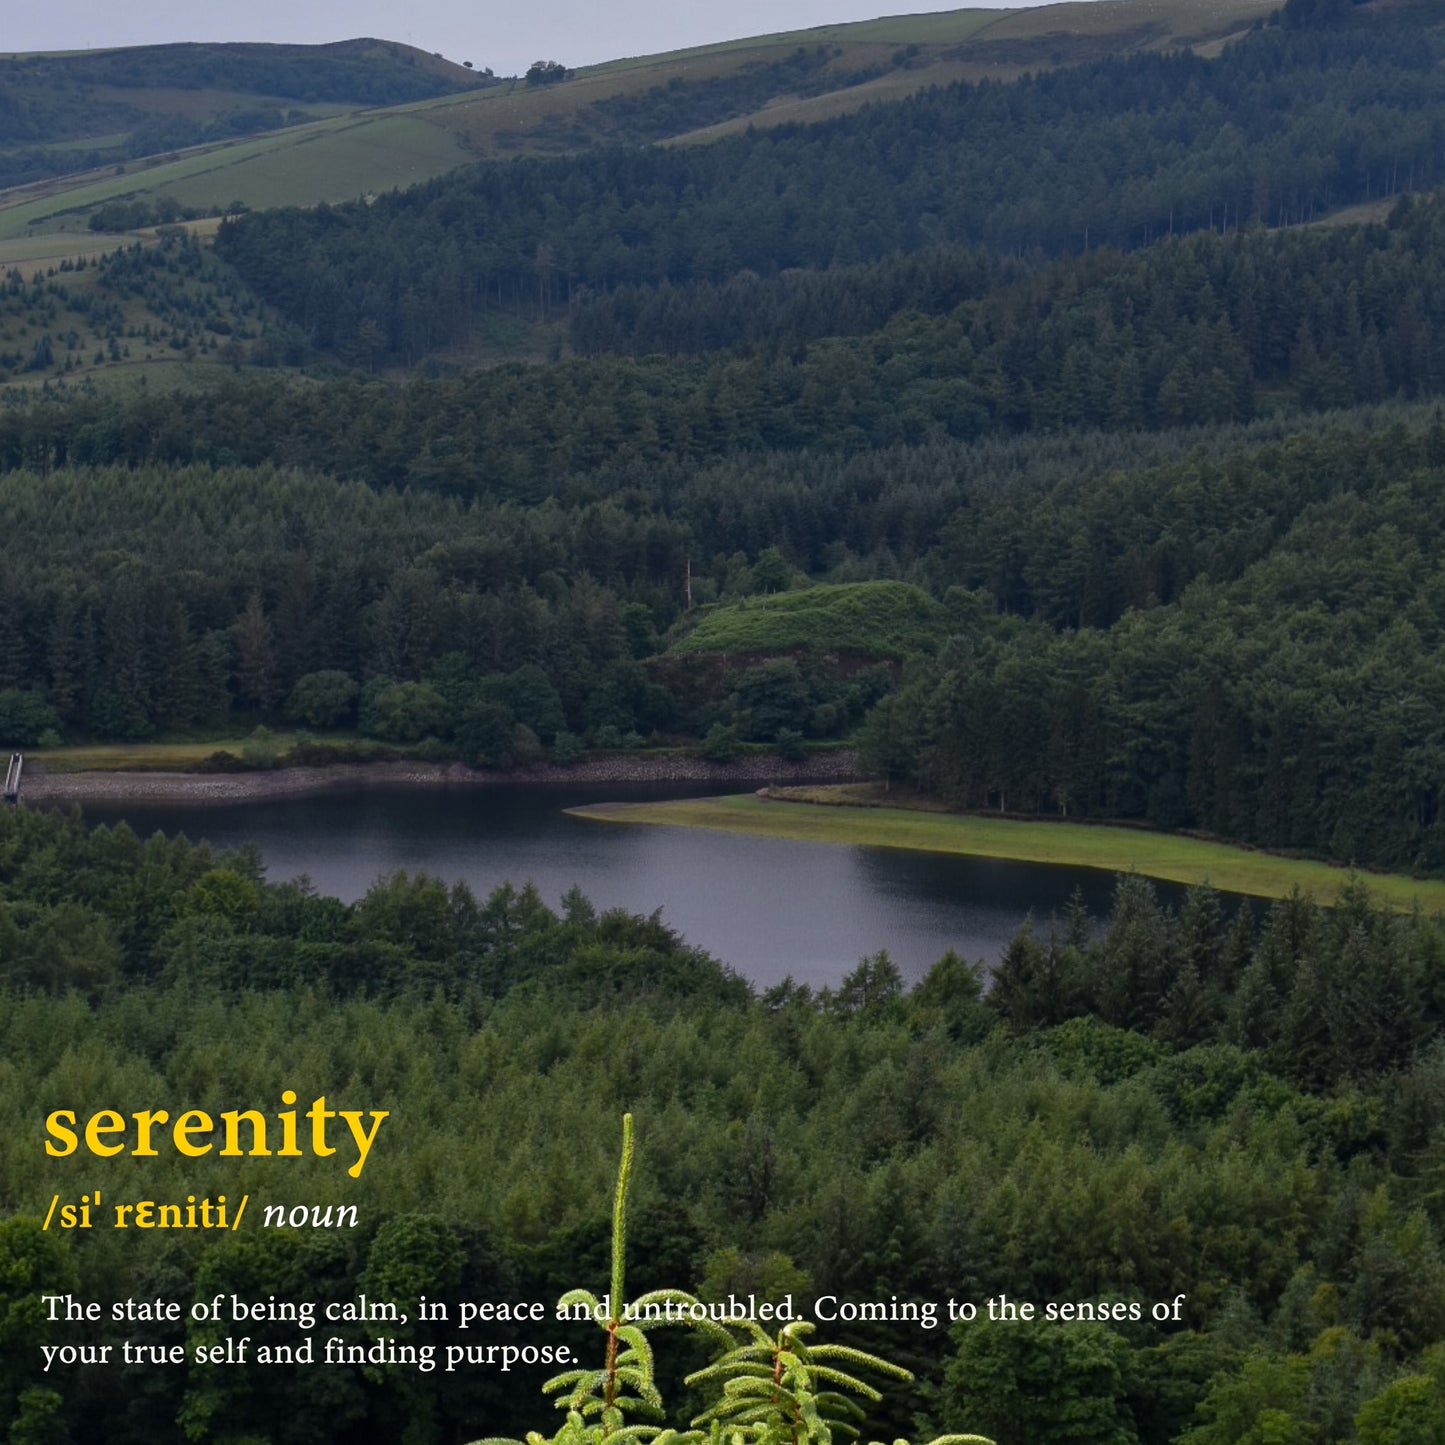 Serenity word definition poster. This photography print looks over a forest and the river with a sea of trees in the distance stretching across the hills. Serenity (noun). The state of being calm, in peace and untroubled. Coming to the senses of your true self and finding purpose.